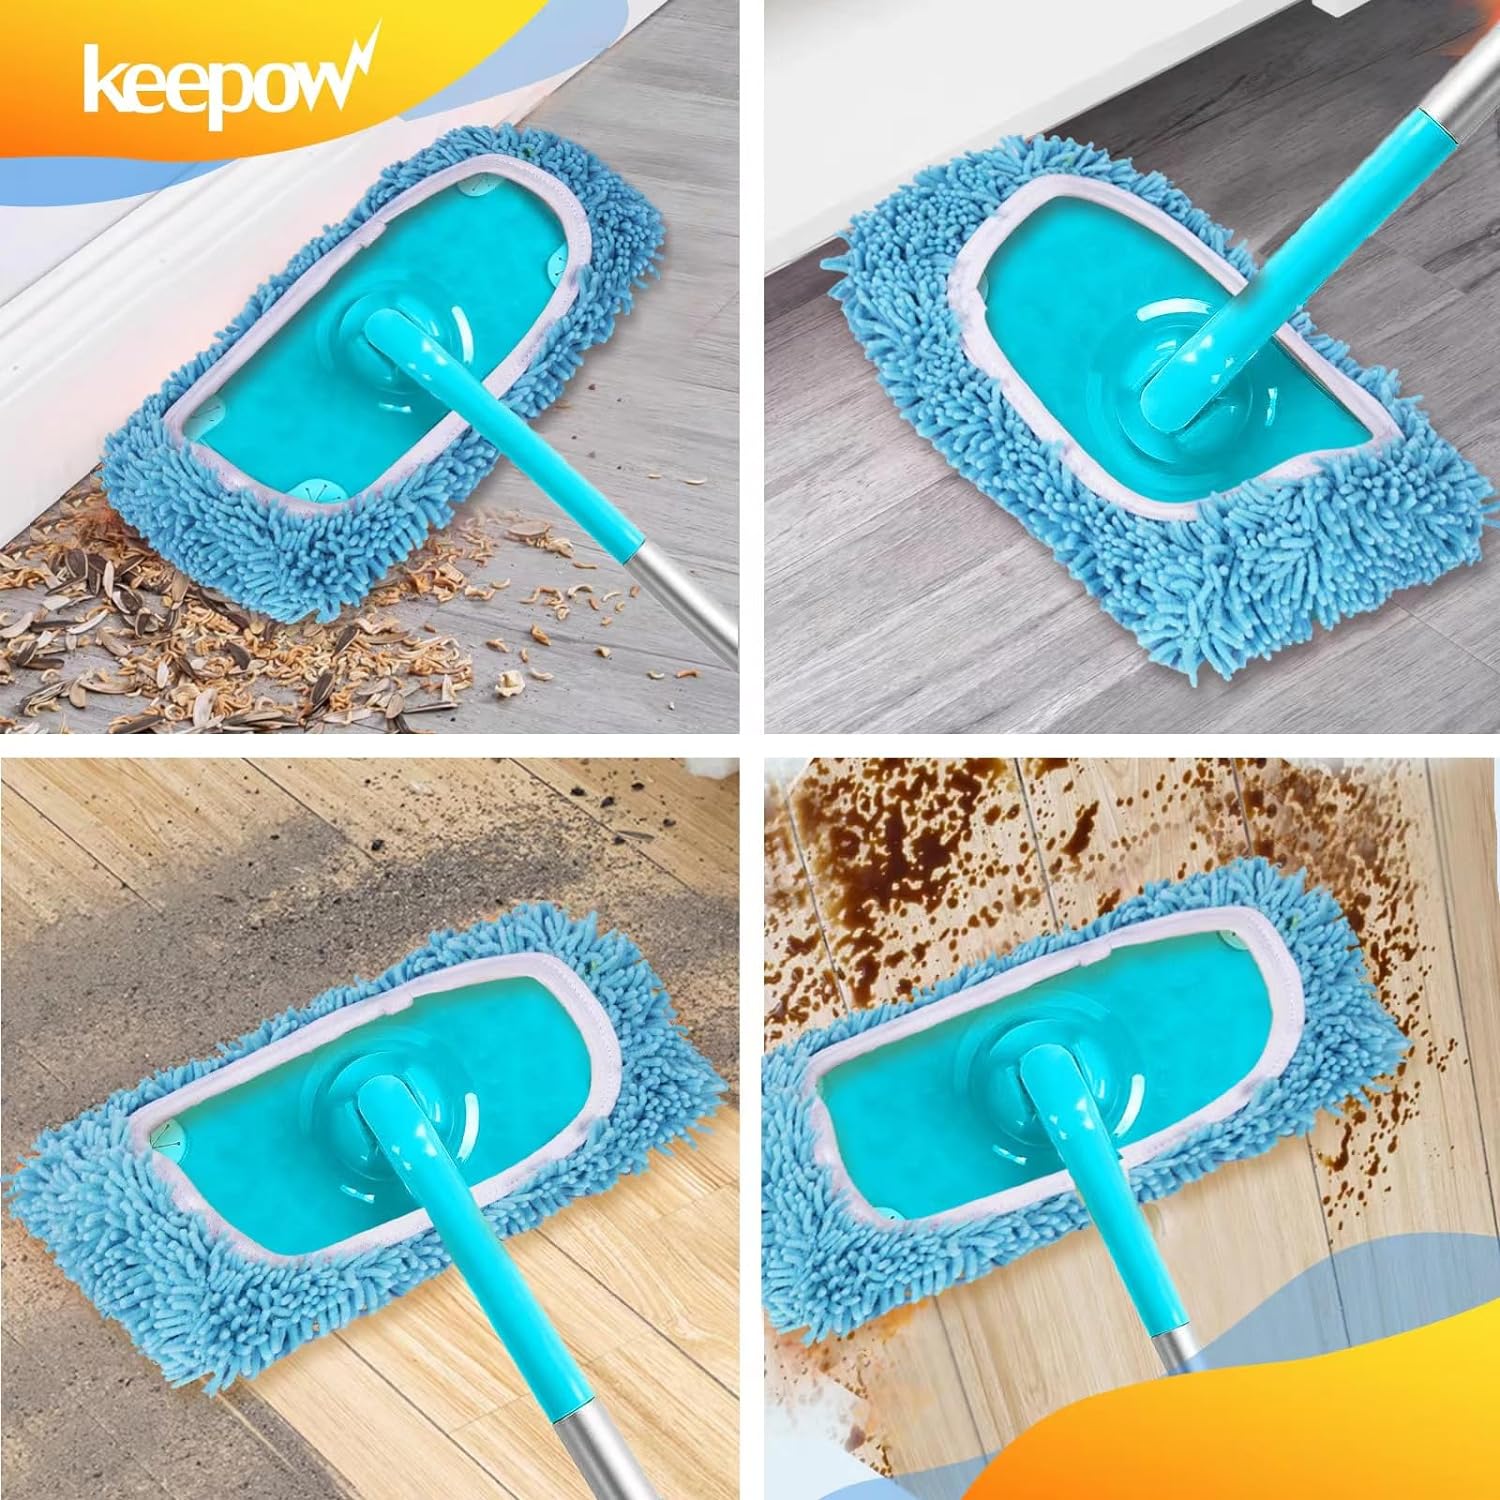 KEEPOW 5701M Reusable Mop Pads for 10-12 Inches Flat Mop, Microfiber Dry Pads for Flash Speed Mop(4 Pack)